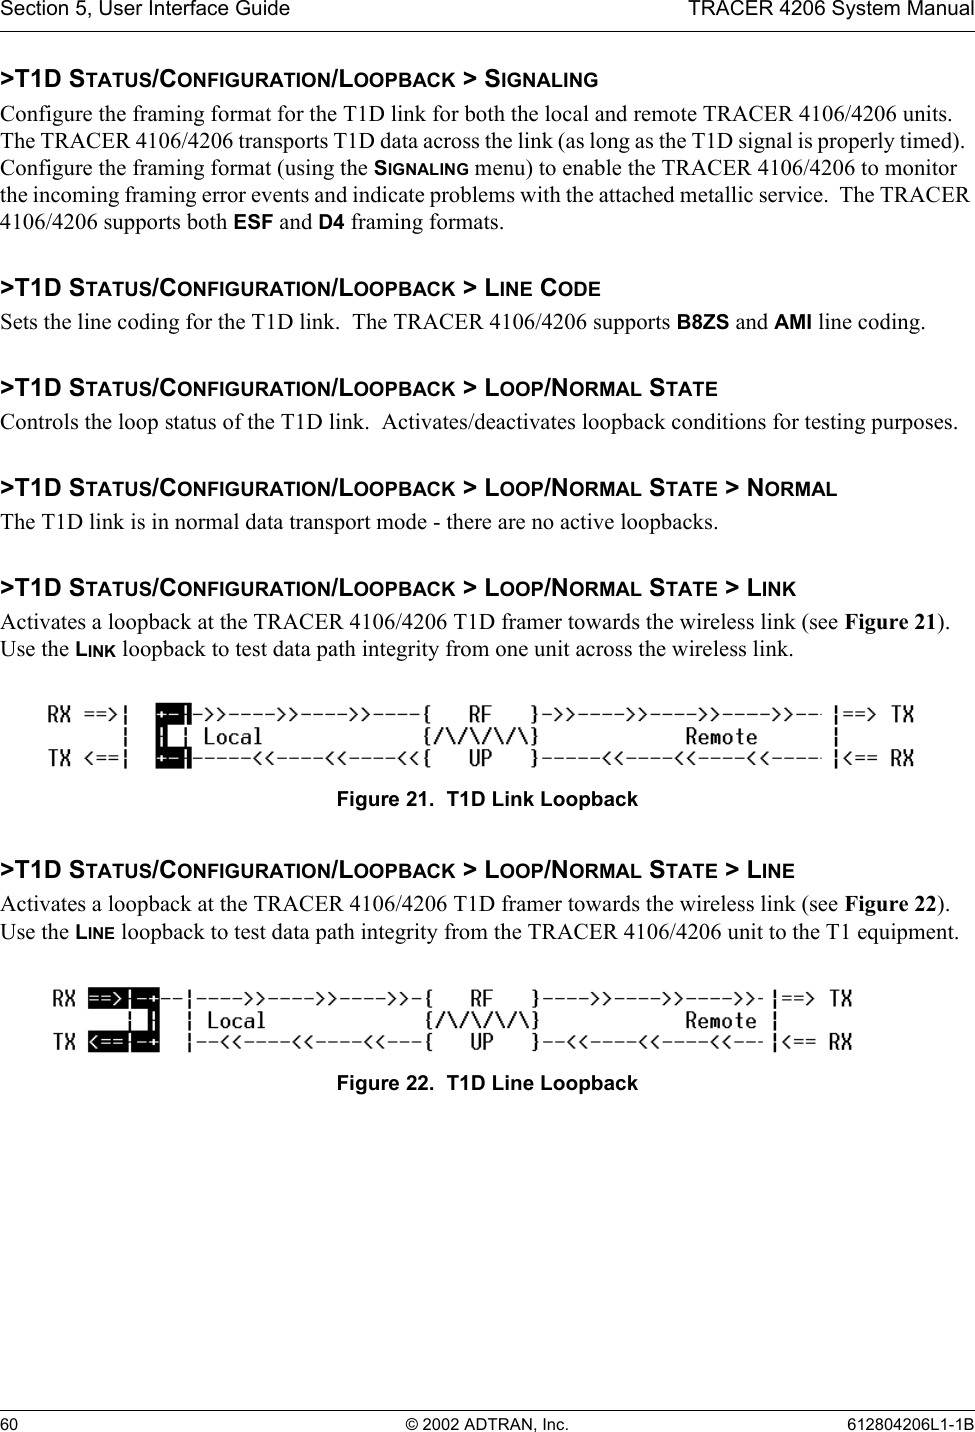 Section 5, User Interface Guide TRACER 4206 System Manual60 © 2002 ADTRAN, Inc. 612804206L1-1B&gt;T1D STATUS/CONFIGURATION/LOOPBACK &gt; SIGNALINGConfigure the framing format for the T1D link for both the local and remote TRACER 4106/4206 units.  The TRACER 4106/4206 transports T1D data across the link (as long as the T1D signal is properly timed).  Configure the framing format (using the SIGNALING menu) to enable the TRACER 4106/4206 to monitor the incoming framing error events and indicate problems with the attached metallic service.  The TRACER 4106/4206 supports both ESF and D4 framing formats.&gt;T1D STATUS/CONFIGURATION/LOOPBACK &gt; LINE CODESets the line coding for the T1D link.  The TRACER 4106/4206 supports B8ZS and AMI line coding.&gt;T1D STATUS/CONFIGURATION/LOOPBACK &gt; LOOP/NORMAL STATEControls the loop status of the T1D link.  Activates/deactivates loopback conditions for testing purposes.&gt;T1D STATUS/CONFIGURATION/LOOPBACK &gt; LOOP/NORMAL STATE &gt; NORMALThe T1D link is in normal data transport mode - there are no active loopbacks.&gt;T1D STATUS/CONFIGURATION/LOOPBACK &gt; LOOP/NORMAL STATE &gt; LINKActivates a loopback at the TRACER 4106/4206 T1D framer towards the wireless link (see Figure 21). Use the LINK loopback to test data path integrity from one unit across the wireless link.Figure 21.  T1D Link Loopback&gt;T1D STATUS/CONFIGURATION/LOOPBACK &gt; LOOP/NORMAL STATE &gt; LINEActivates a loopback at the TRACER 4106/4206 T1D framer towards the wireless link (see Figure 22). Use the LINE loopback to test data path integrity from the TRACER 4106/4206 unit to the T1 equipment.Figure 22.  T1D Line Loopback